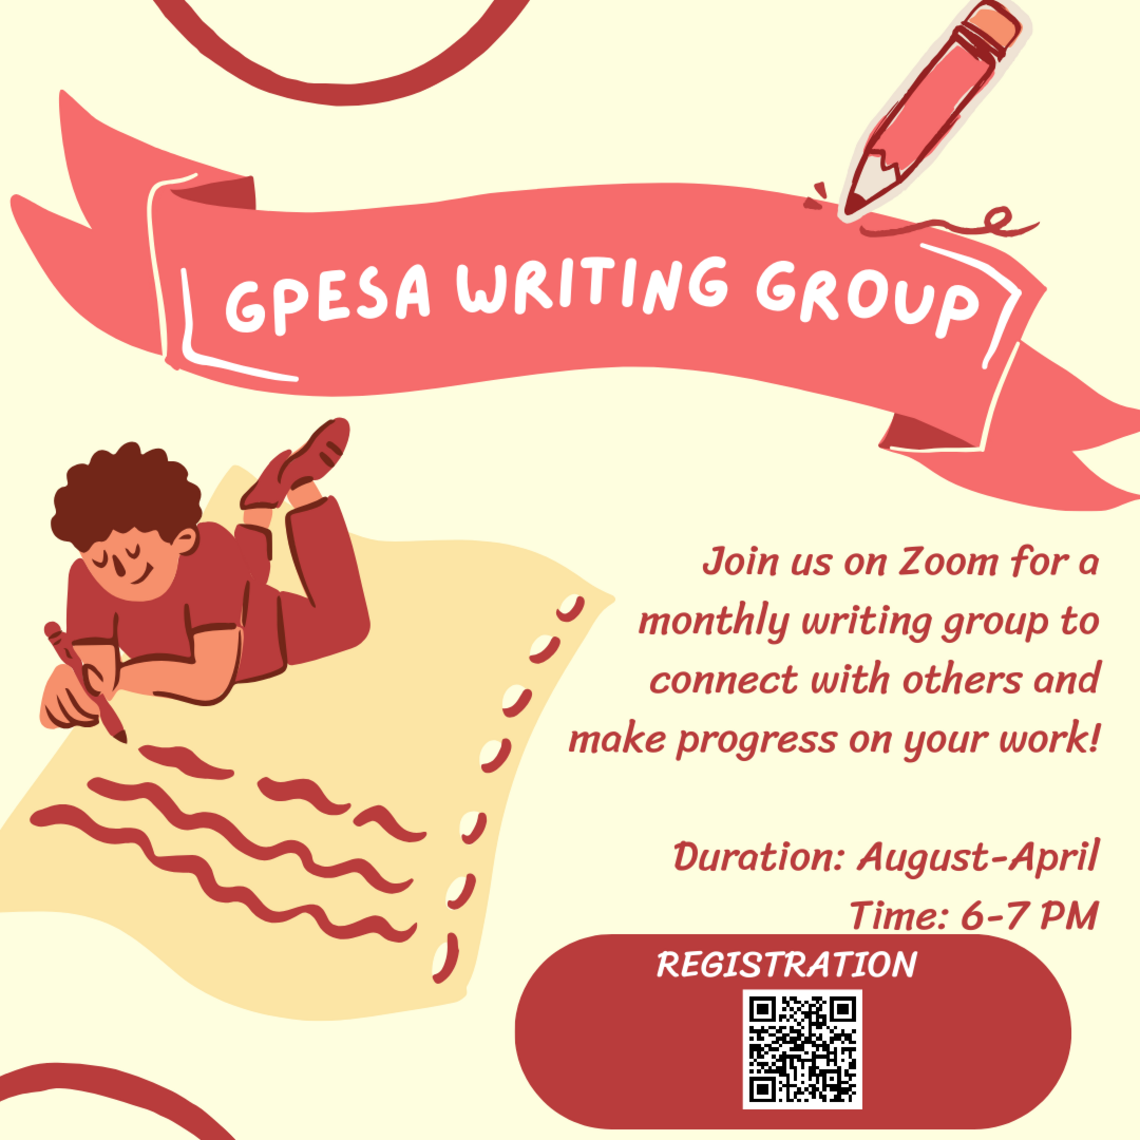 Advertisement for the GPESA Writing Group